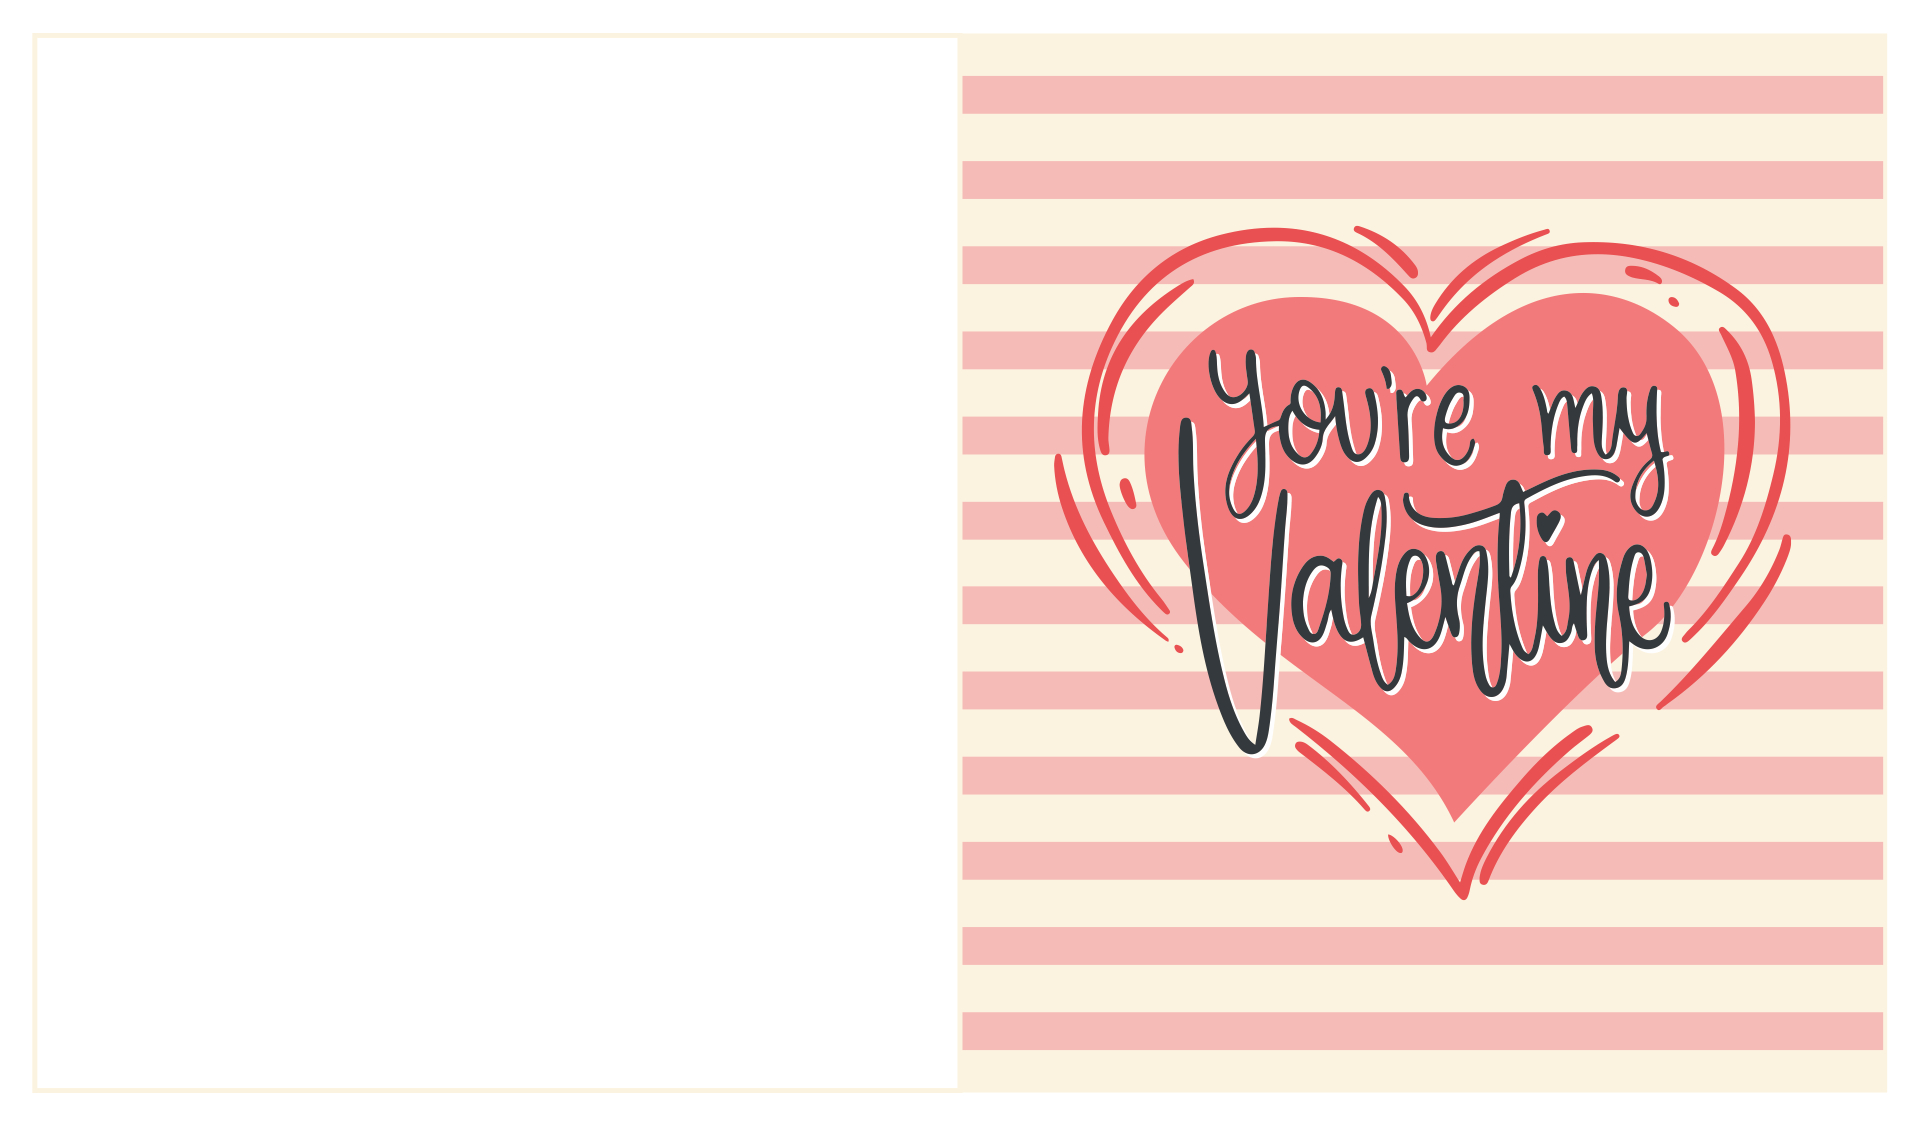 8-best-images-of-happy-valentine-s-cards-printable-out-free-printable